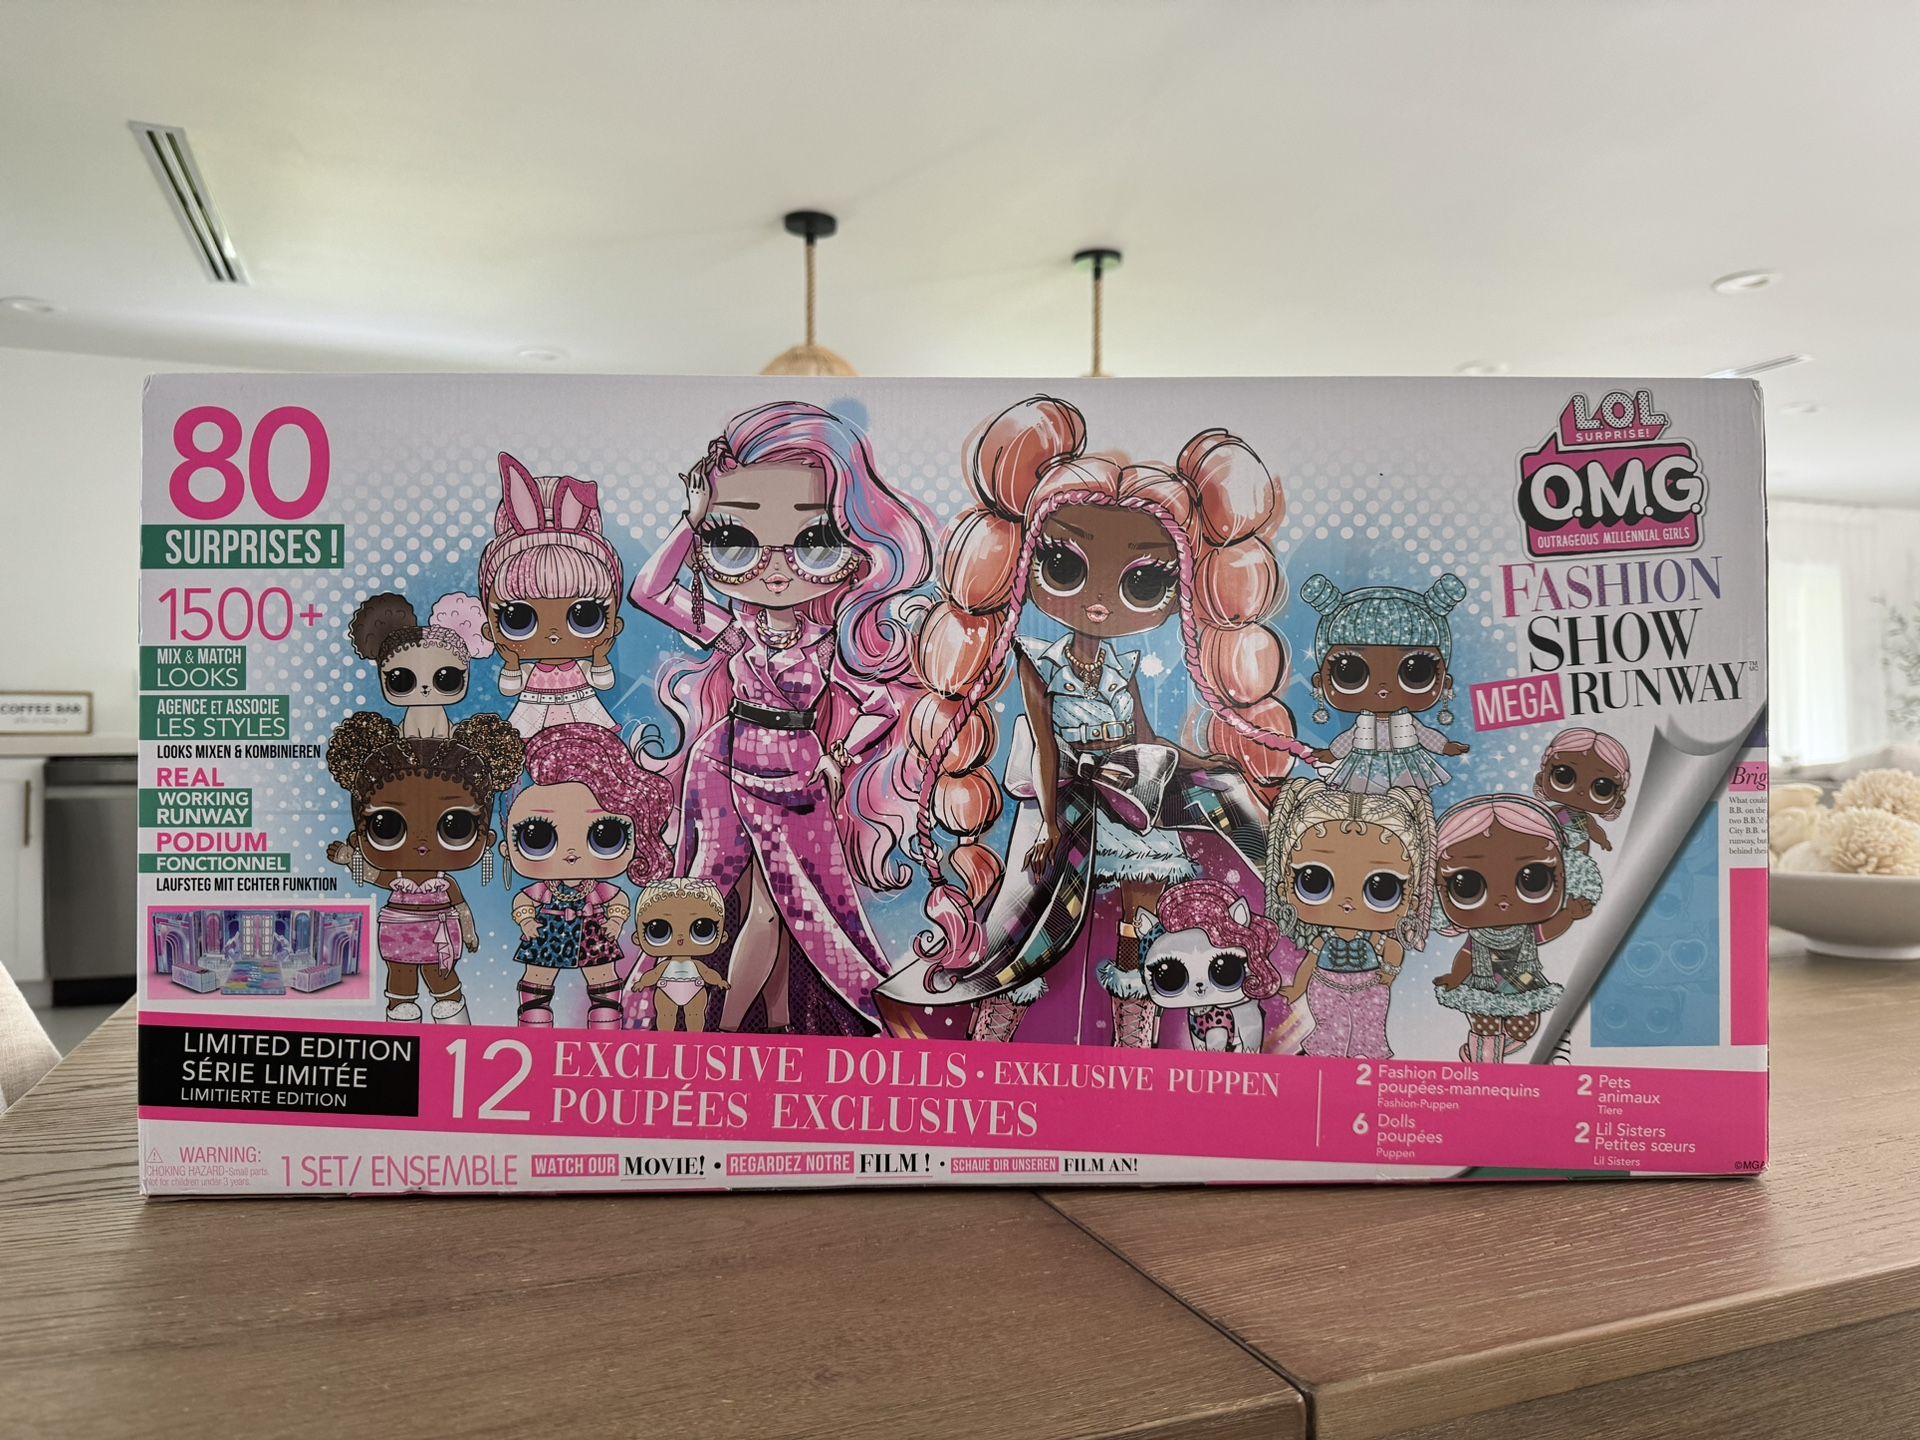 LOL SURPRISE DOLL FASHION SHOW- MEGA RUNWAY PLAYSET WITH 80 SURPRISES